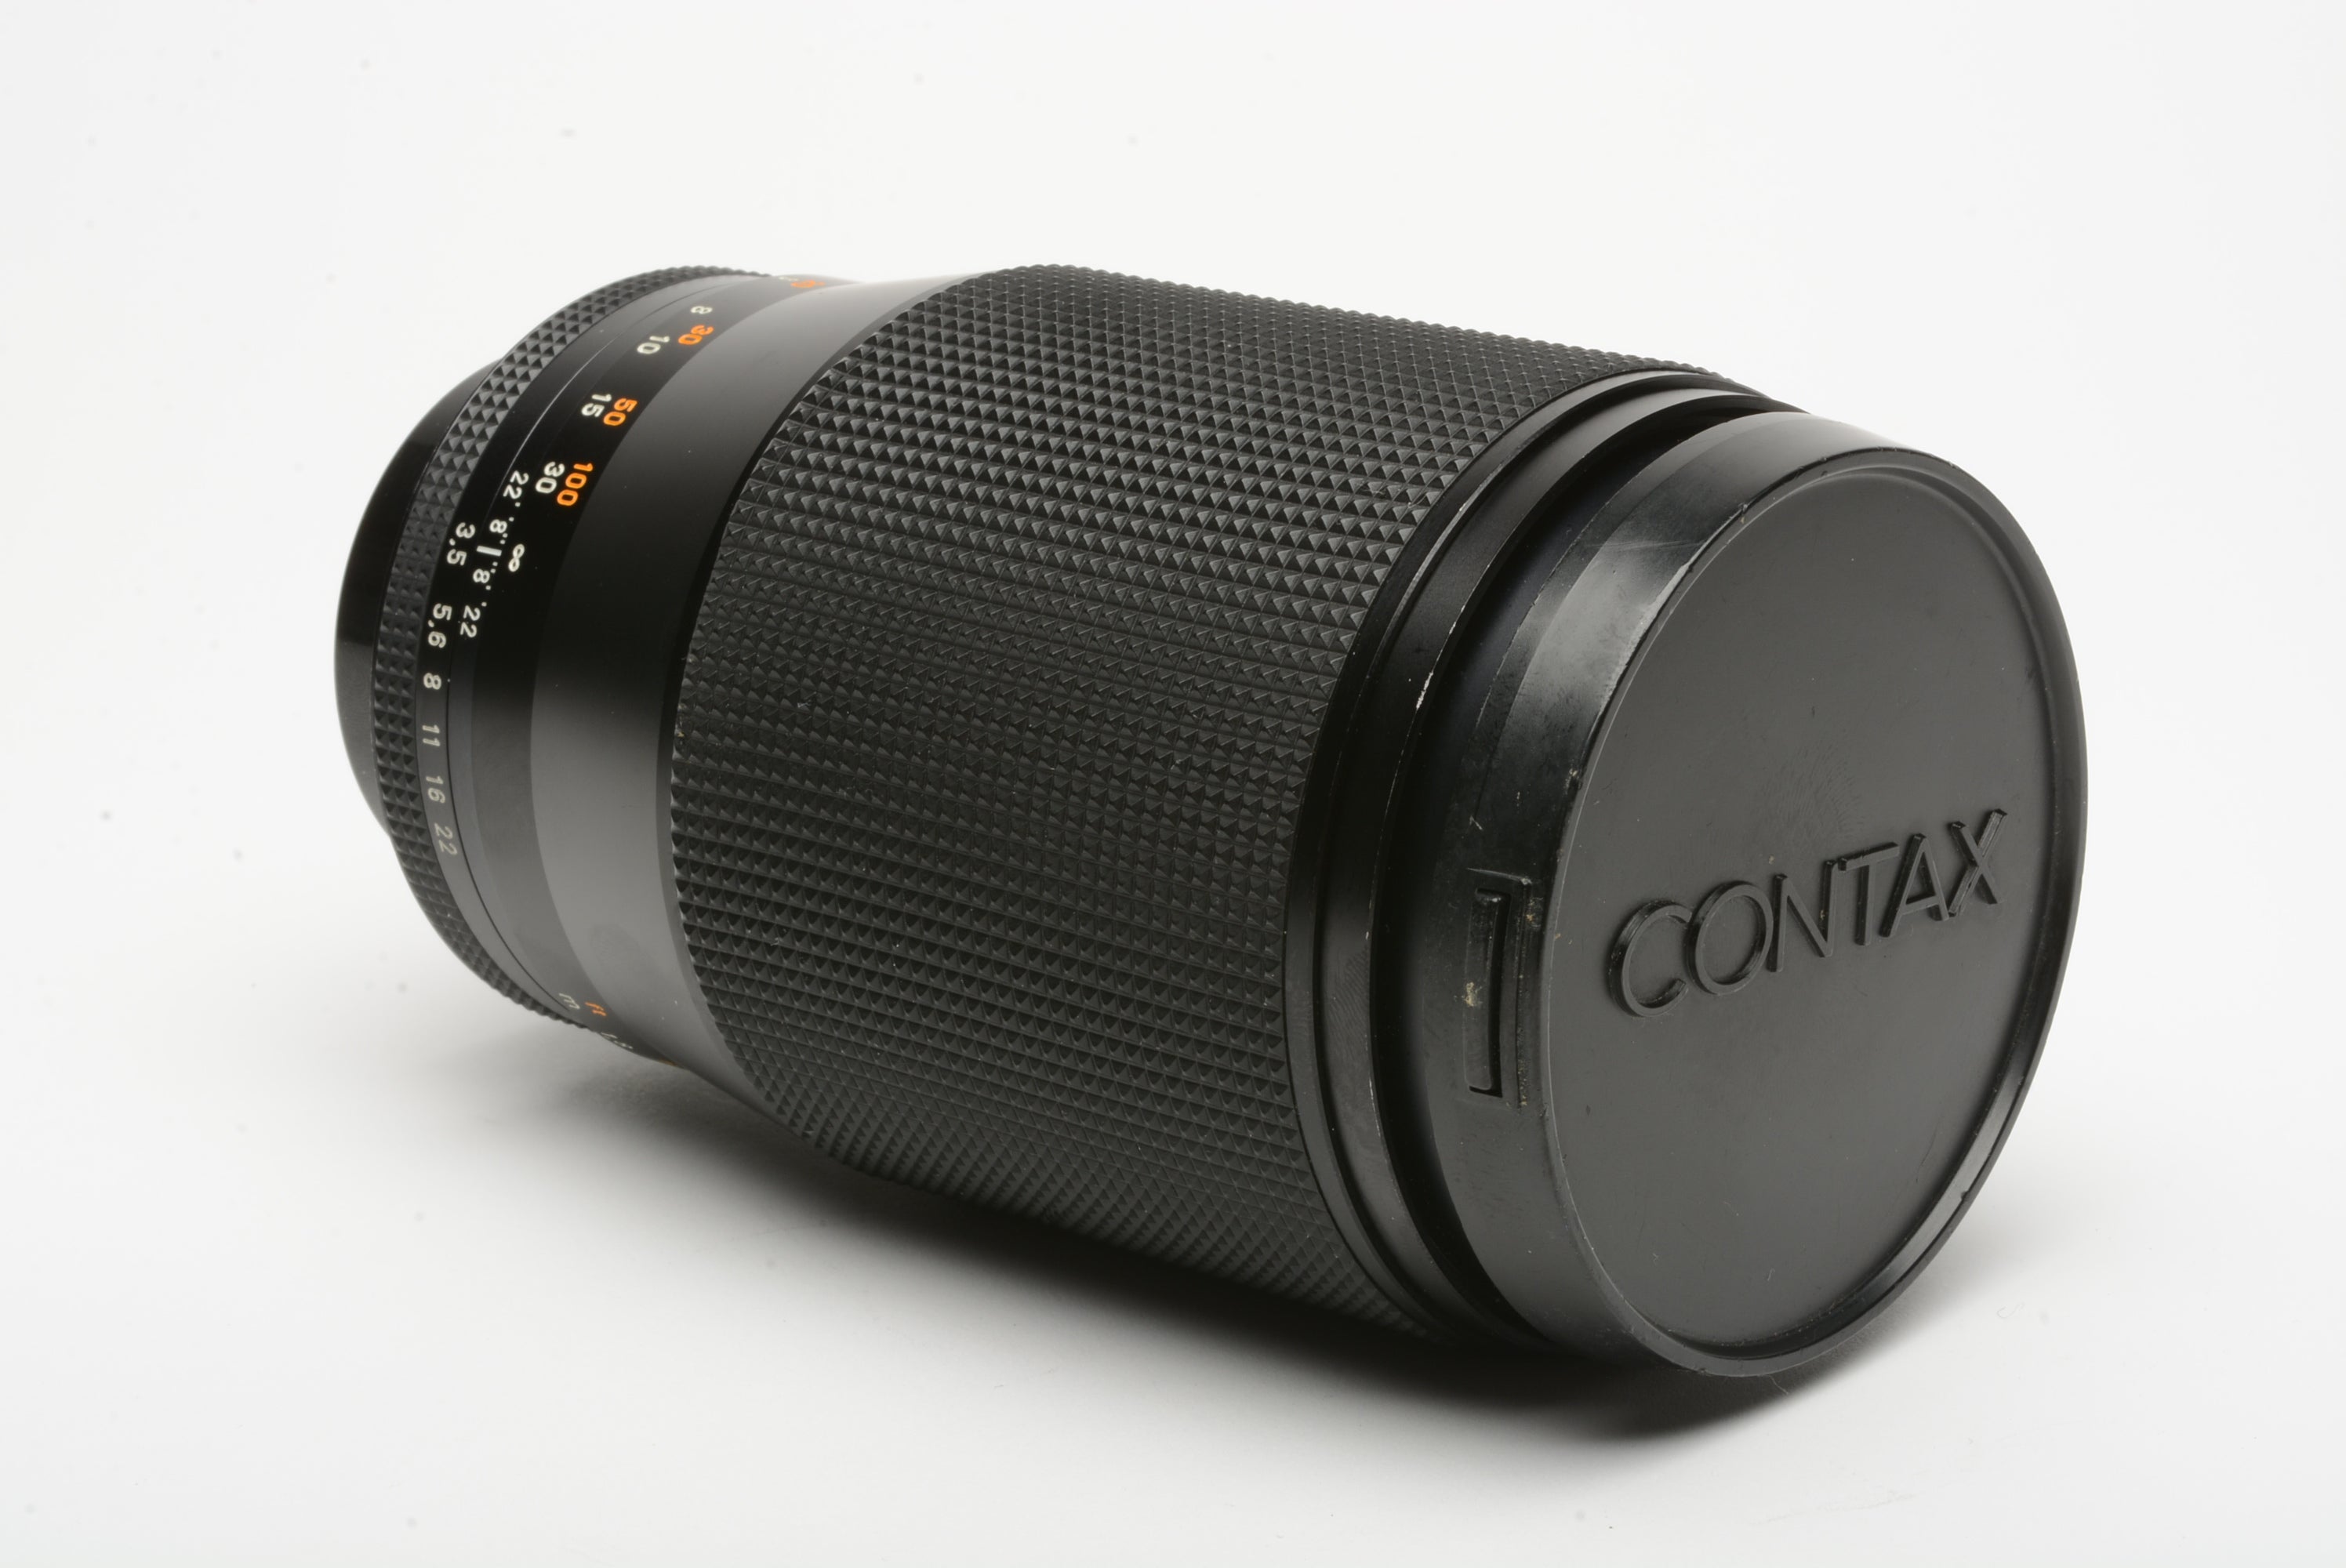 Contax Tele-Tessar 200mm f3.5 AEG T* lens for Contax/Yashica mount 